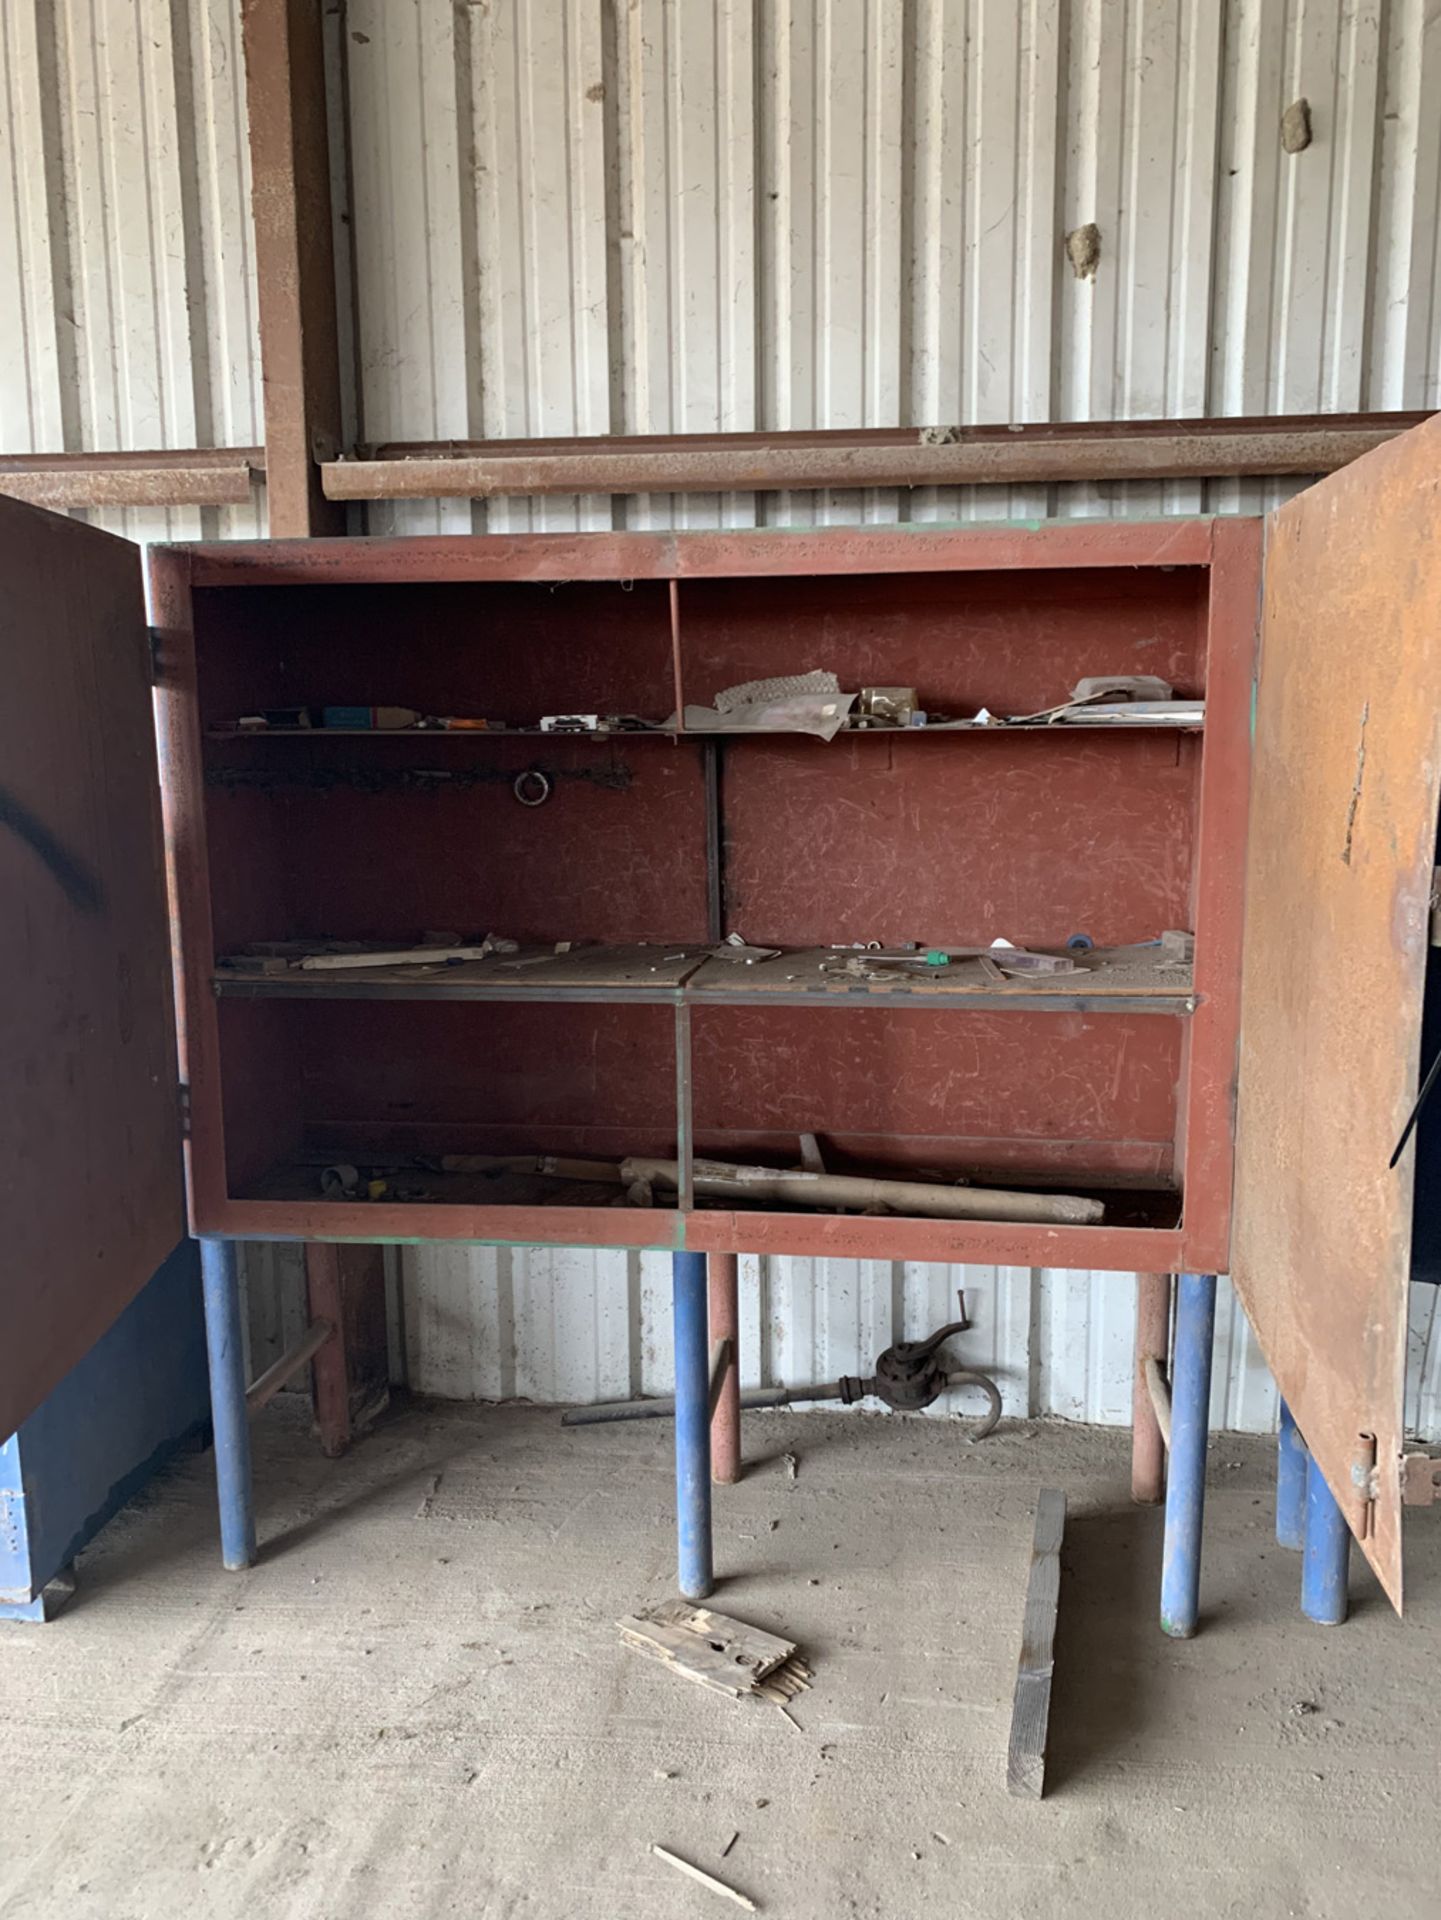 Heavy Duty Metal Cabinet with 2 Shelves, 72" x 20" x 74" H - Image 2 of 2